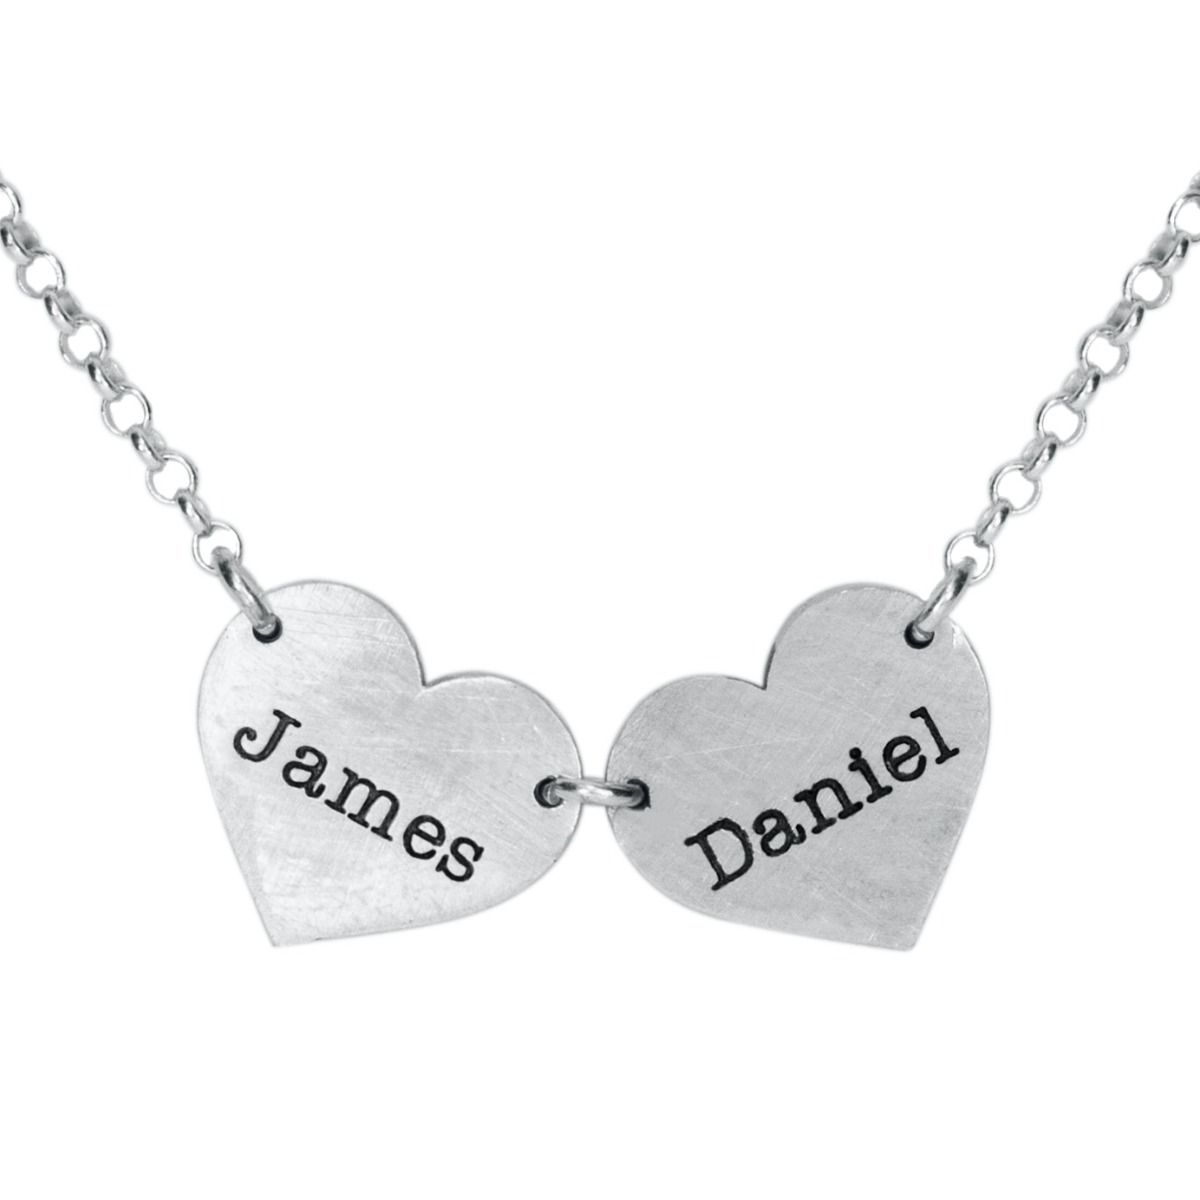 Sterling Silver Personalized Necklace Name Jewelry with Heart SN30 